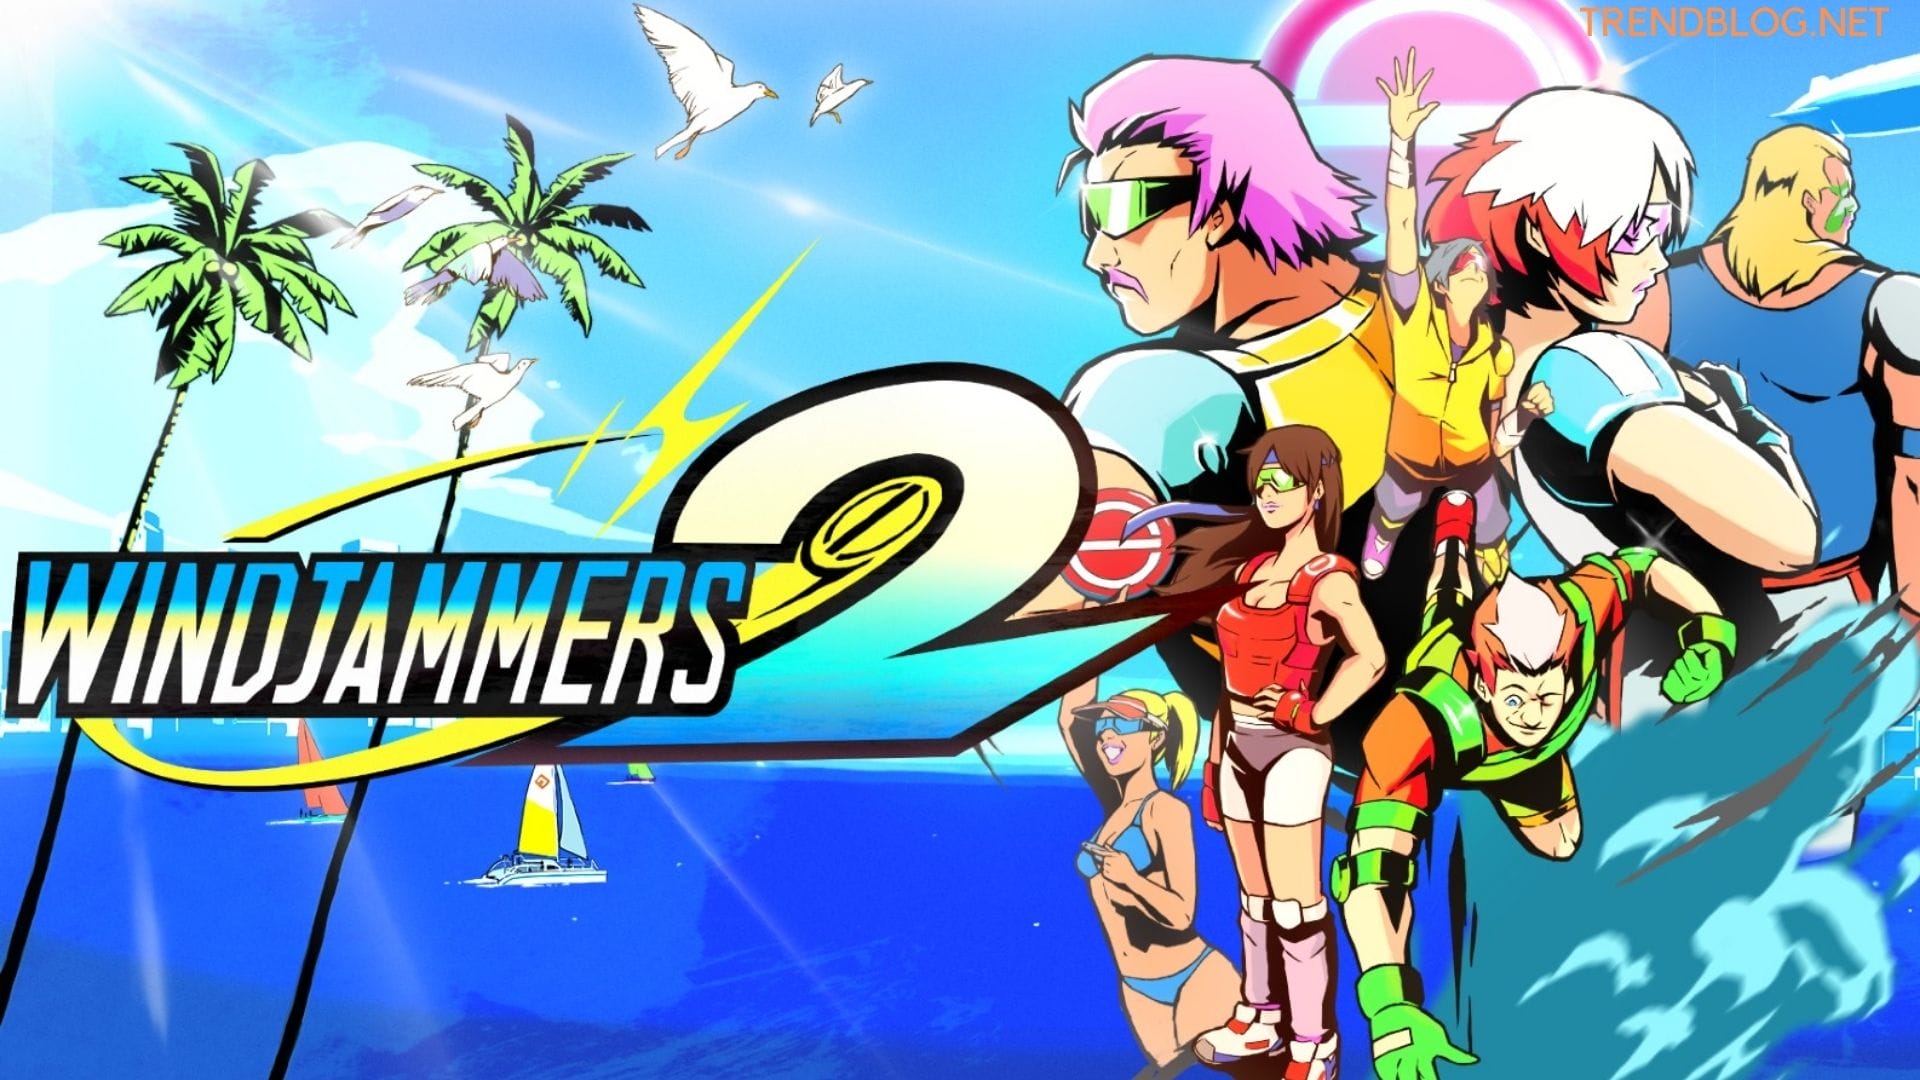 Windjammers 2 Reatese Date PC Game 2022